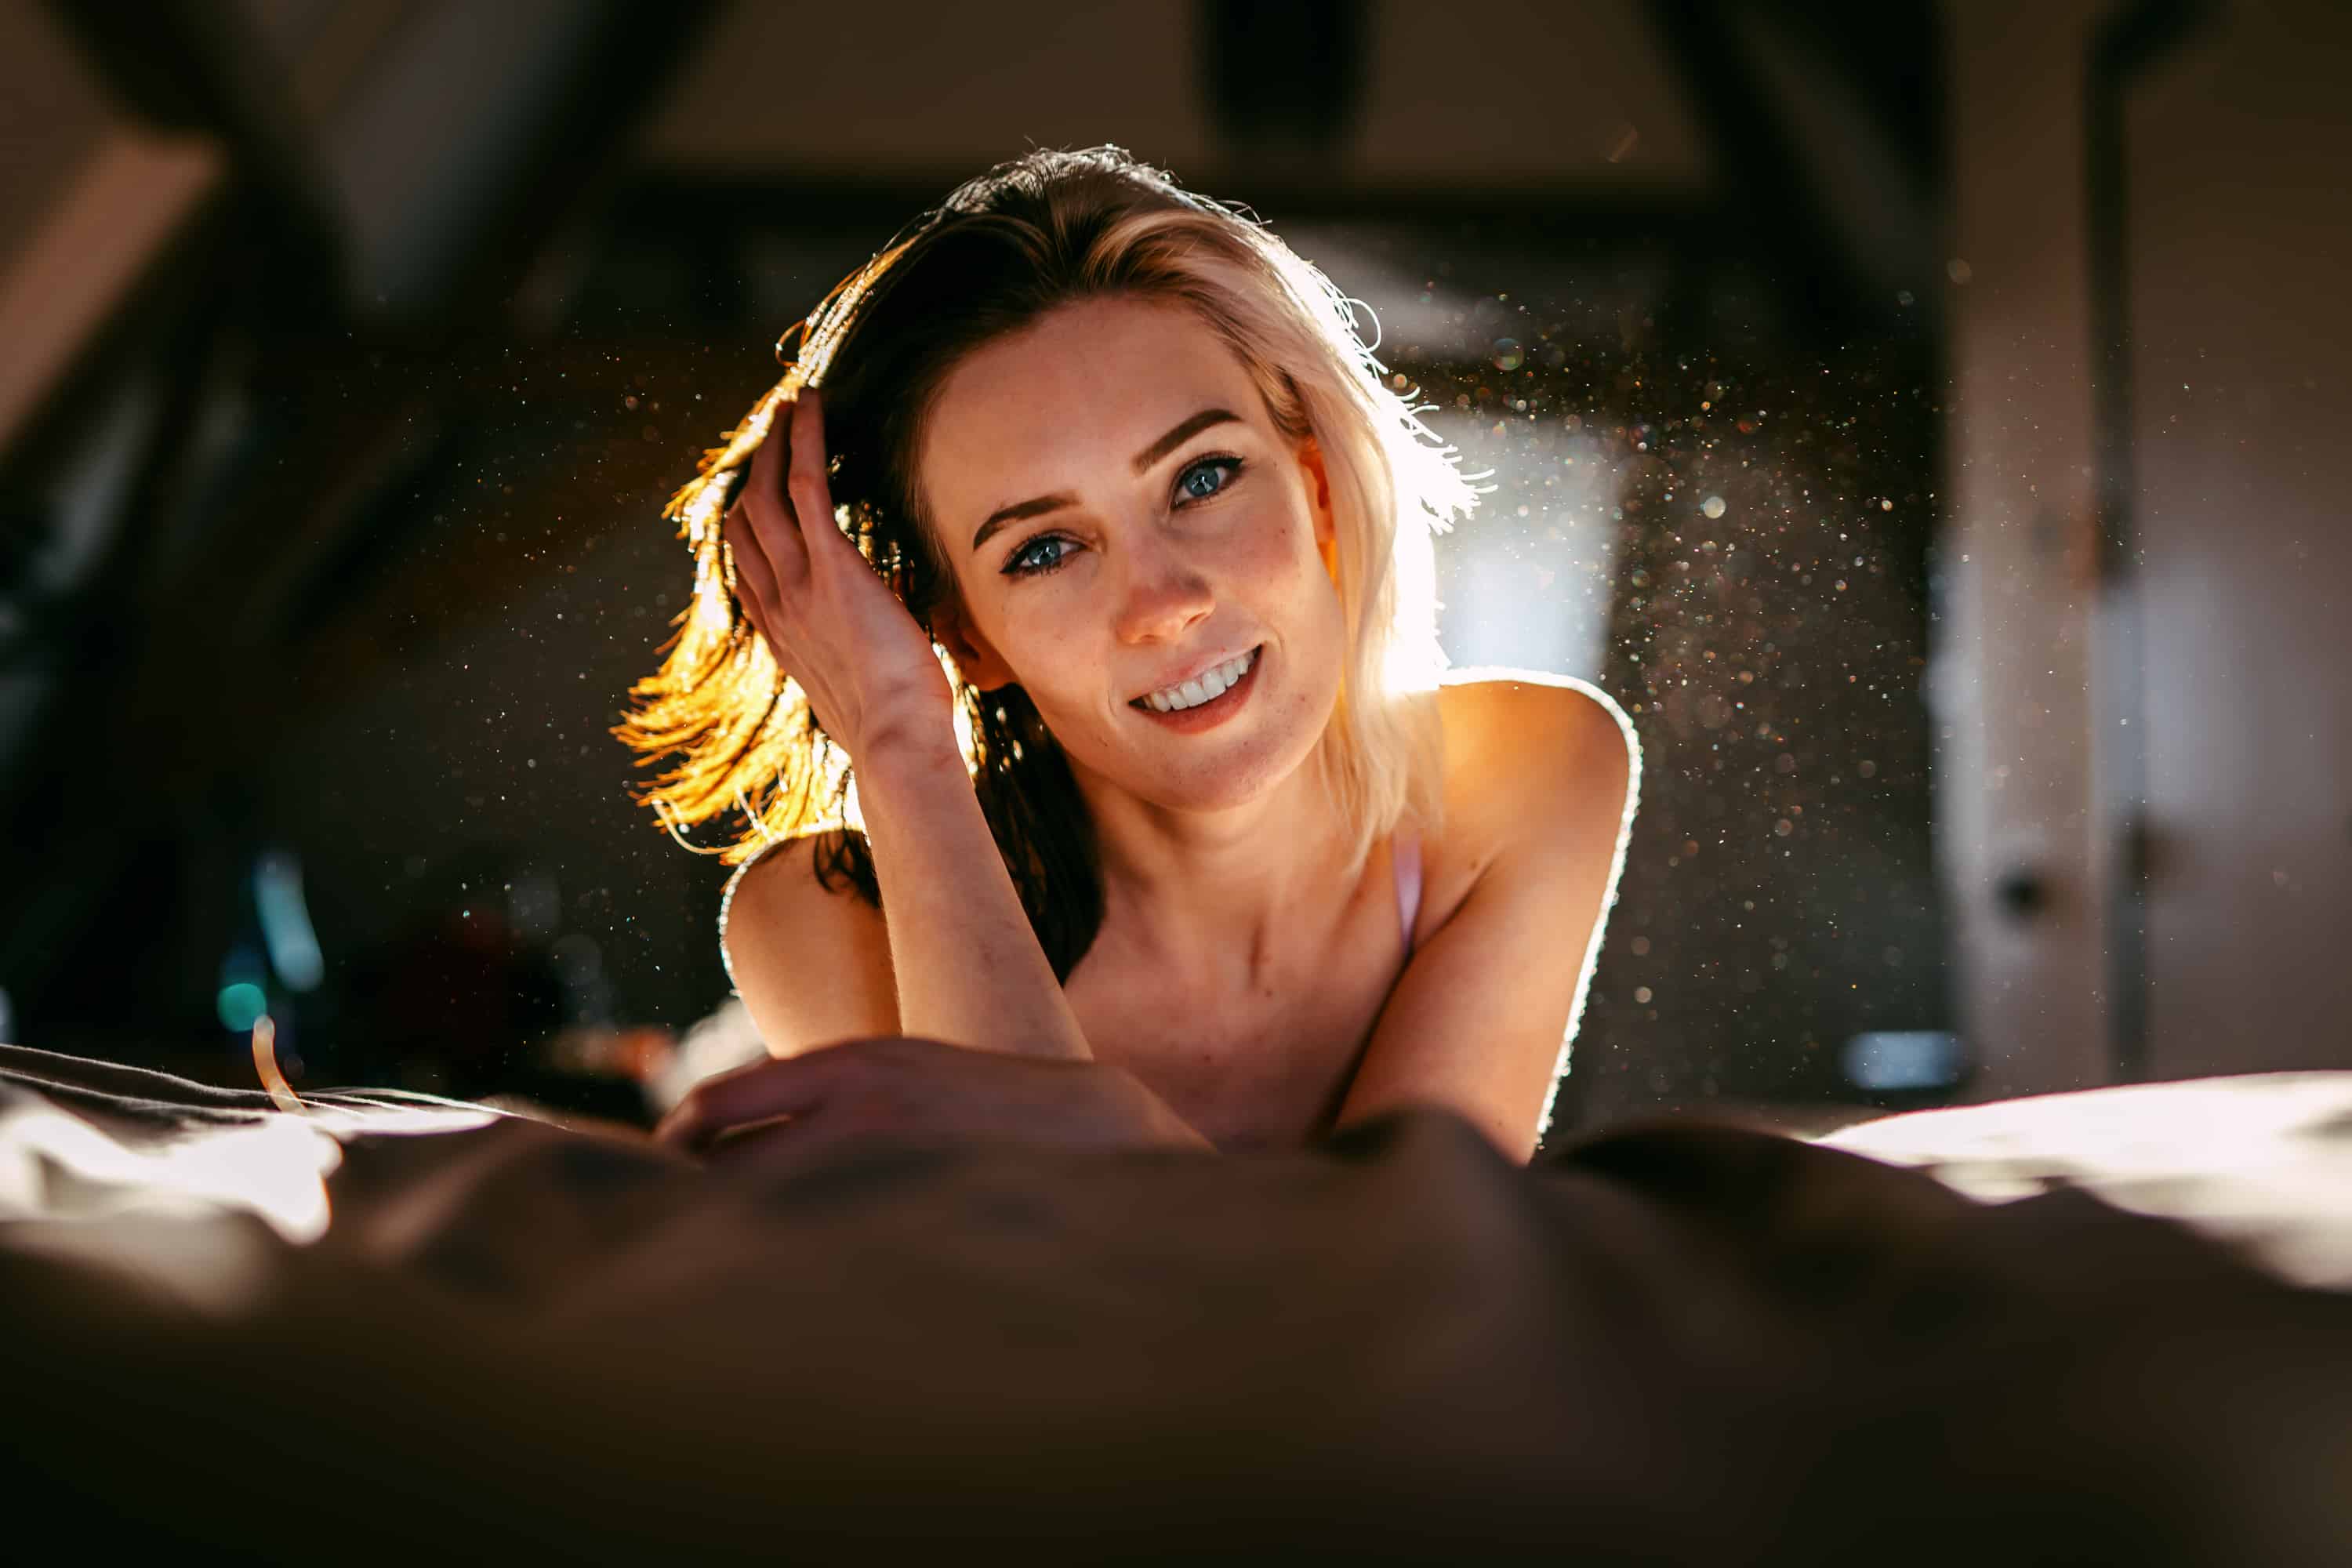 A young woman poses seductively on a bed during a boudoir shoot in a dark room.